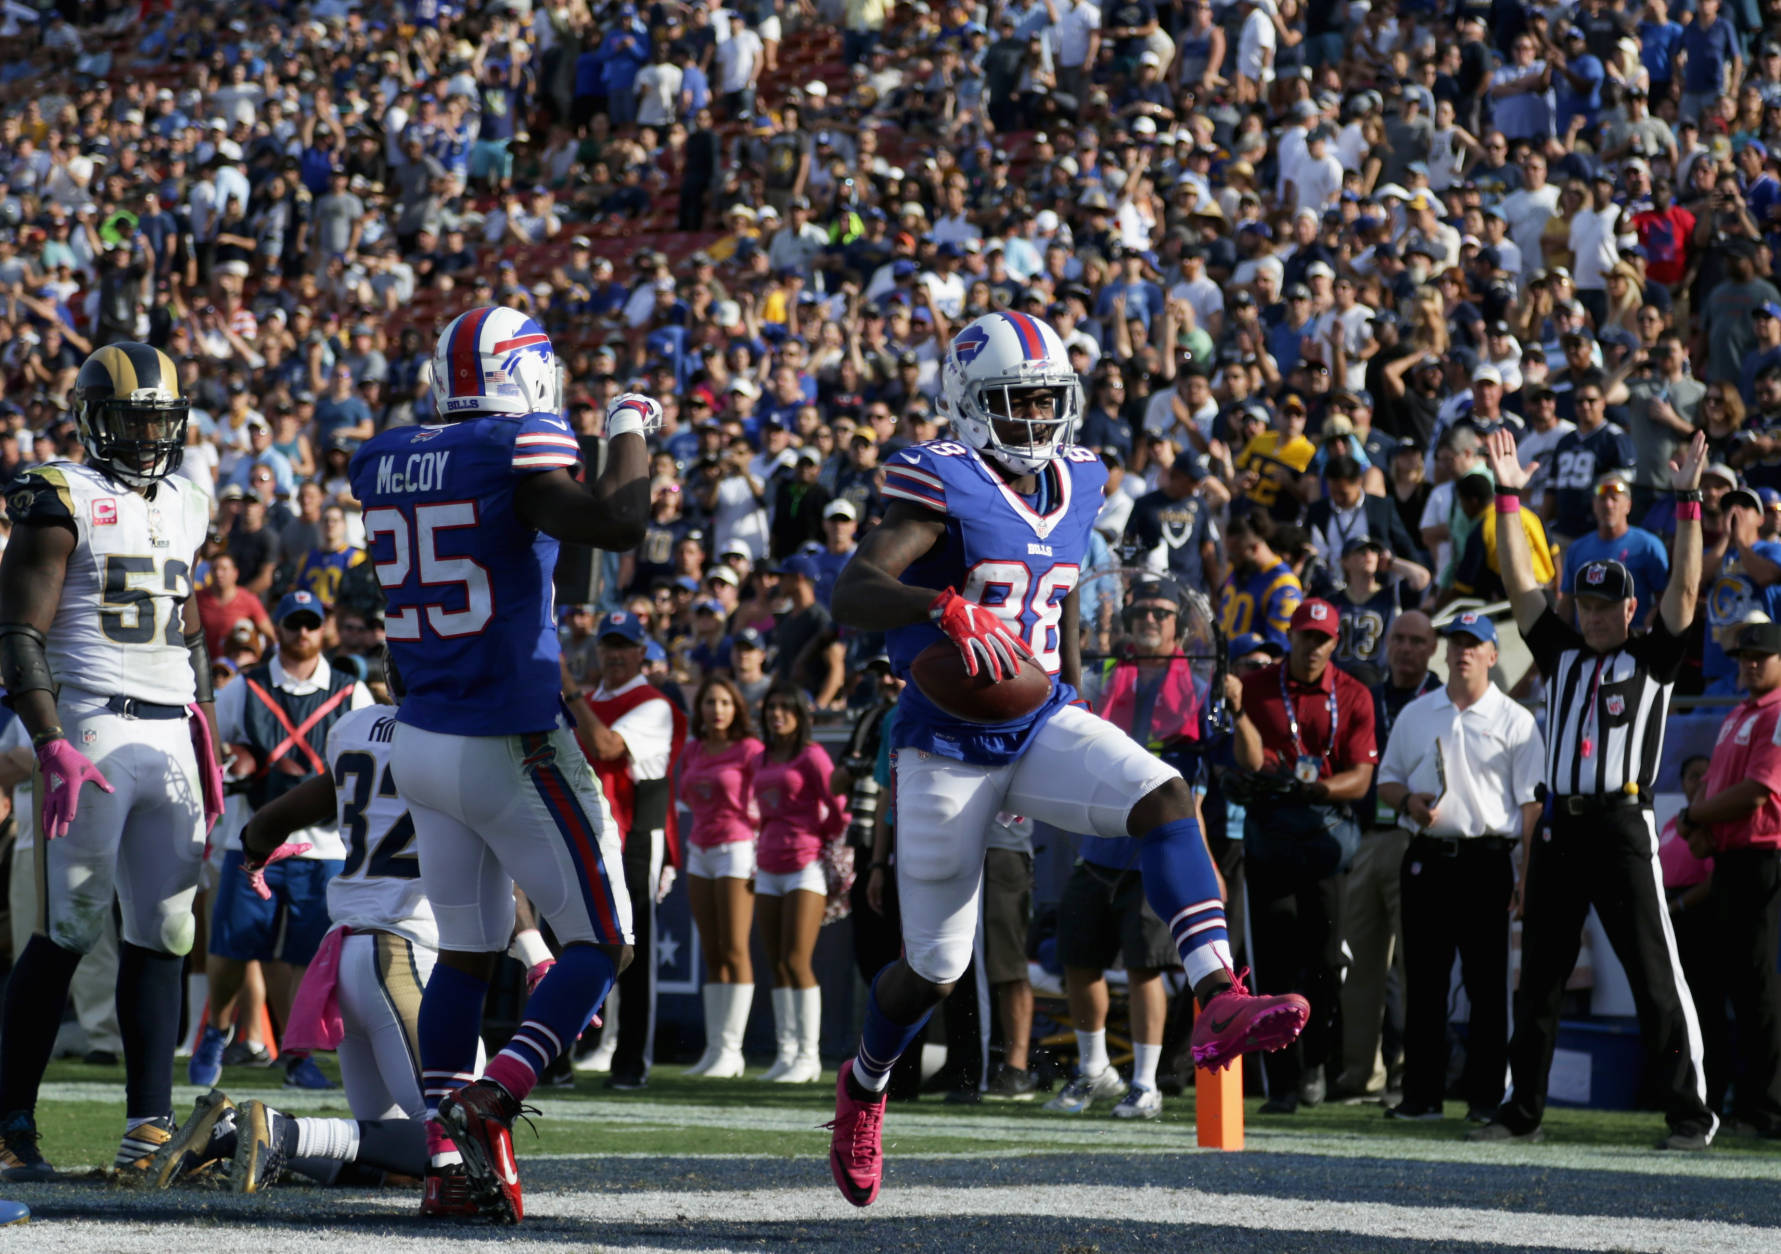 LOS ANGELES, CA - OCTOBER 09:  Marquise Goodwin #88 of the Buffalo Bills celebrates his touchdown with teammates to take a 30-19 lead in the fourth quarter of the game against the Los Angeles Rams at the Los Angeles Memorial Coliseum on October 9, 2016 in Los Angeles, California.  (Photo by Jeff Gross/Getty Images)